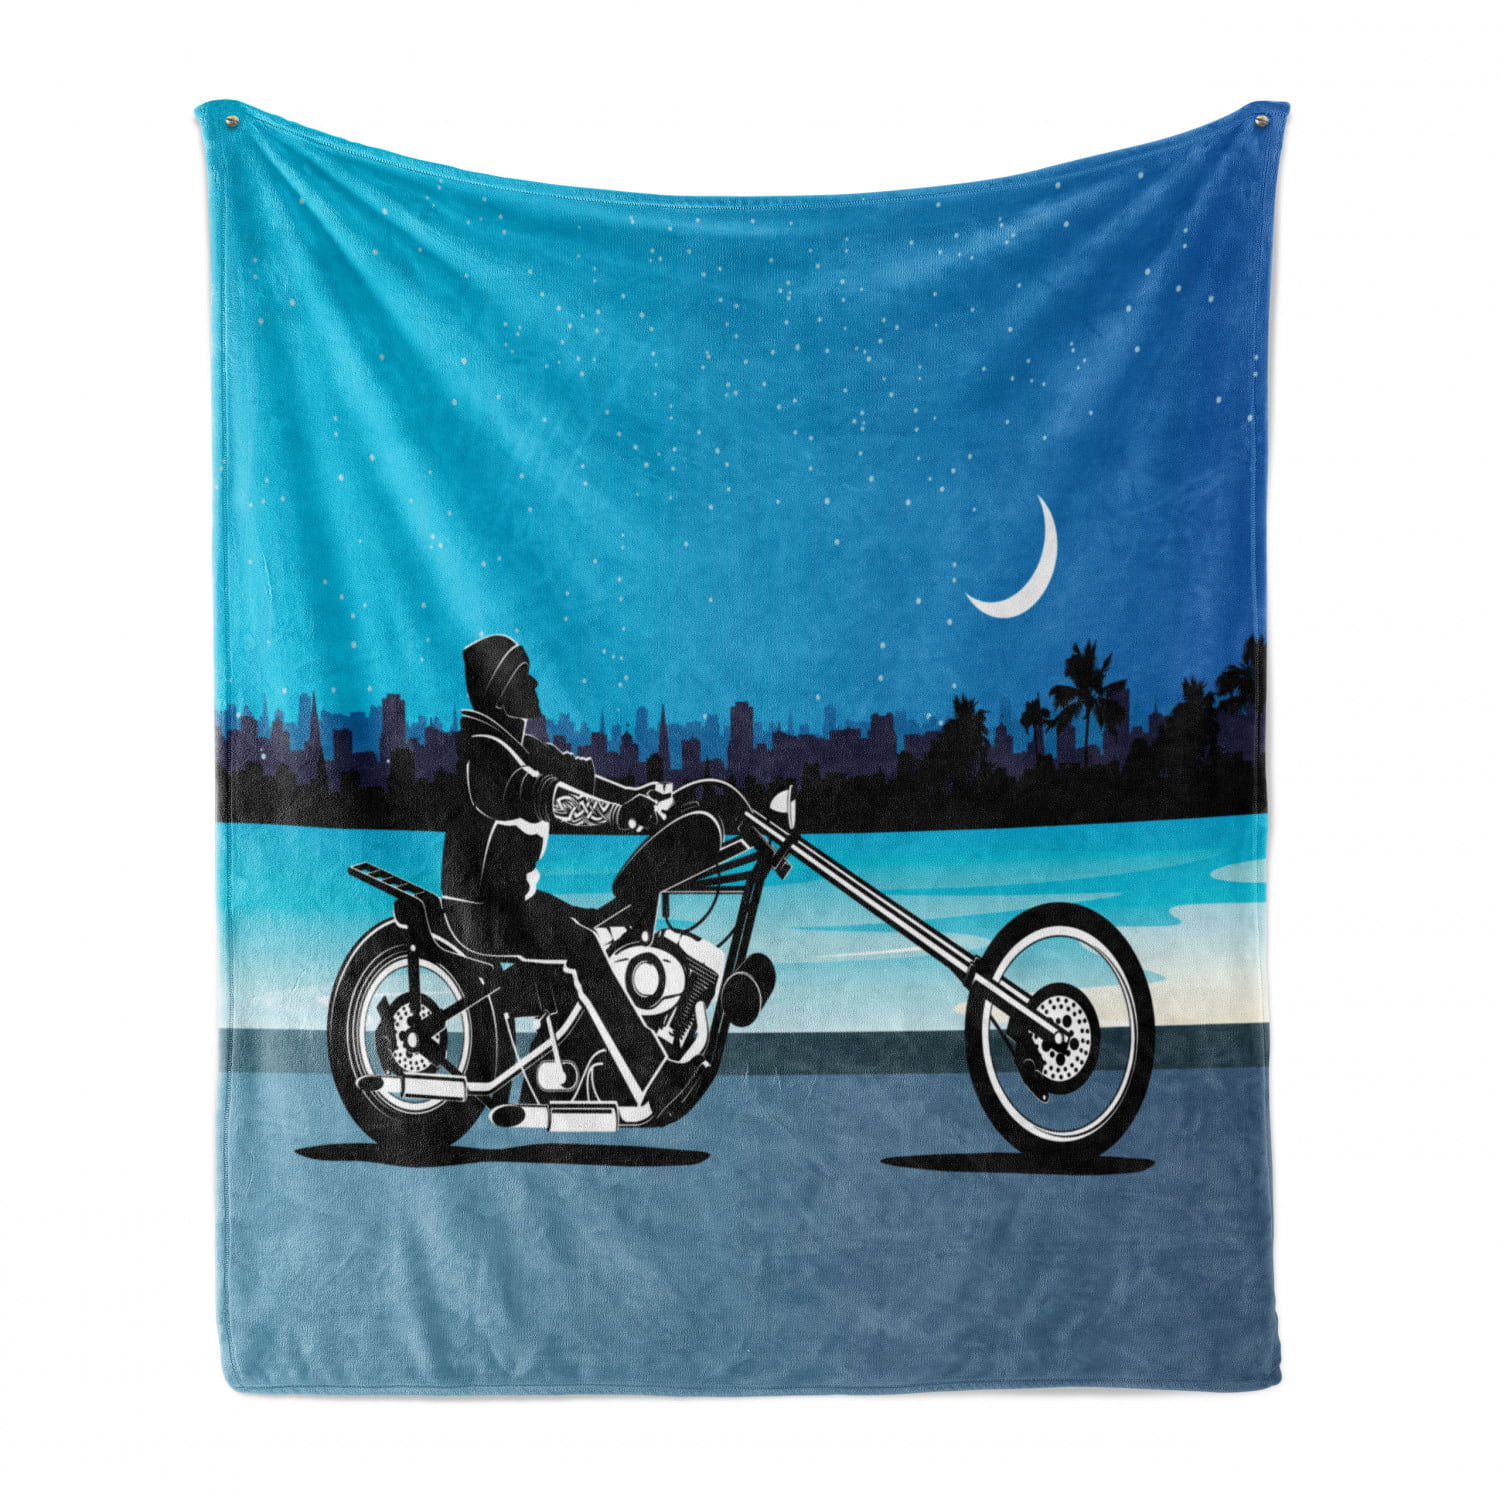 Ambesonne Motorcycle Soft Flannel Fleece Throw Blanket Art with Chopper Motorcycle Biker Riding Starry Night Sky Cityscape Silhouette Cozy Plush for Indoor and Outdoor Use Black Navy 50 x 60